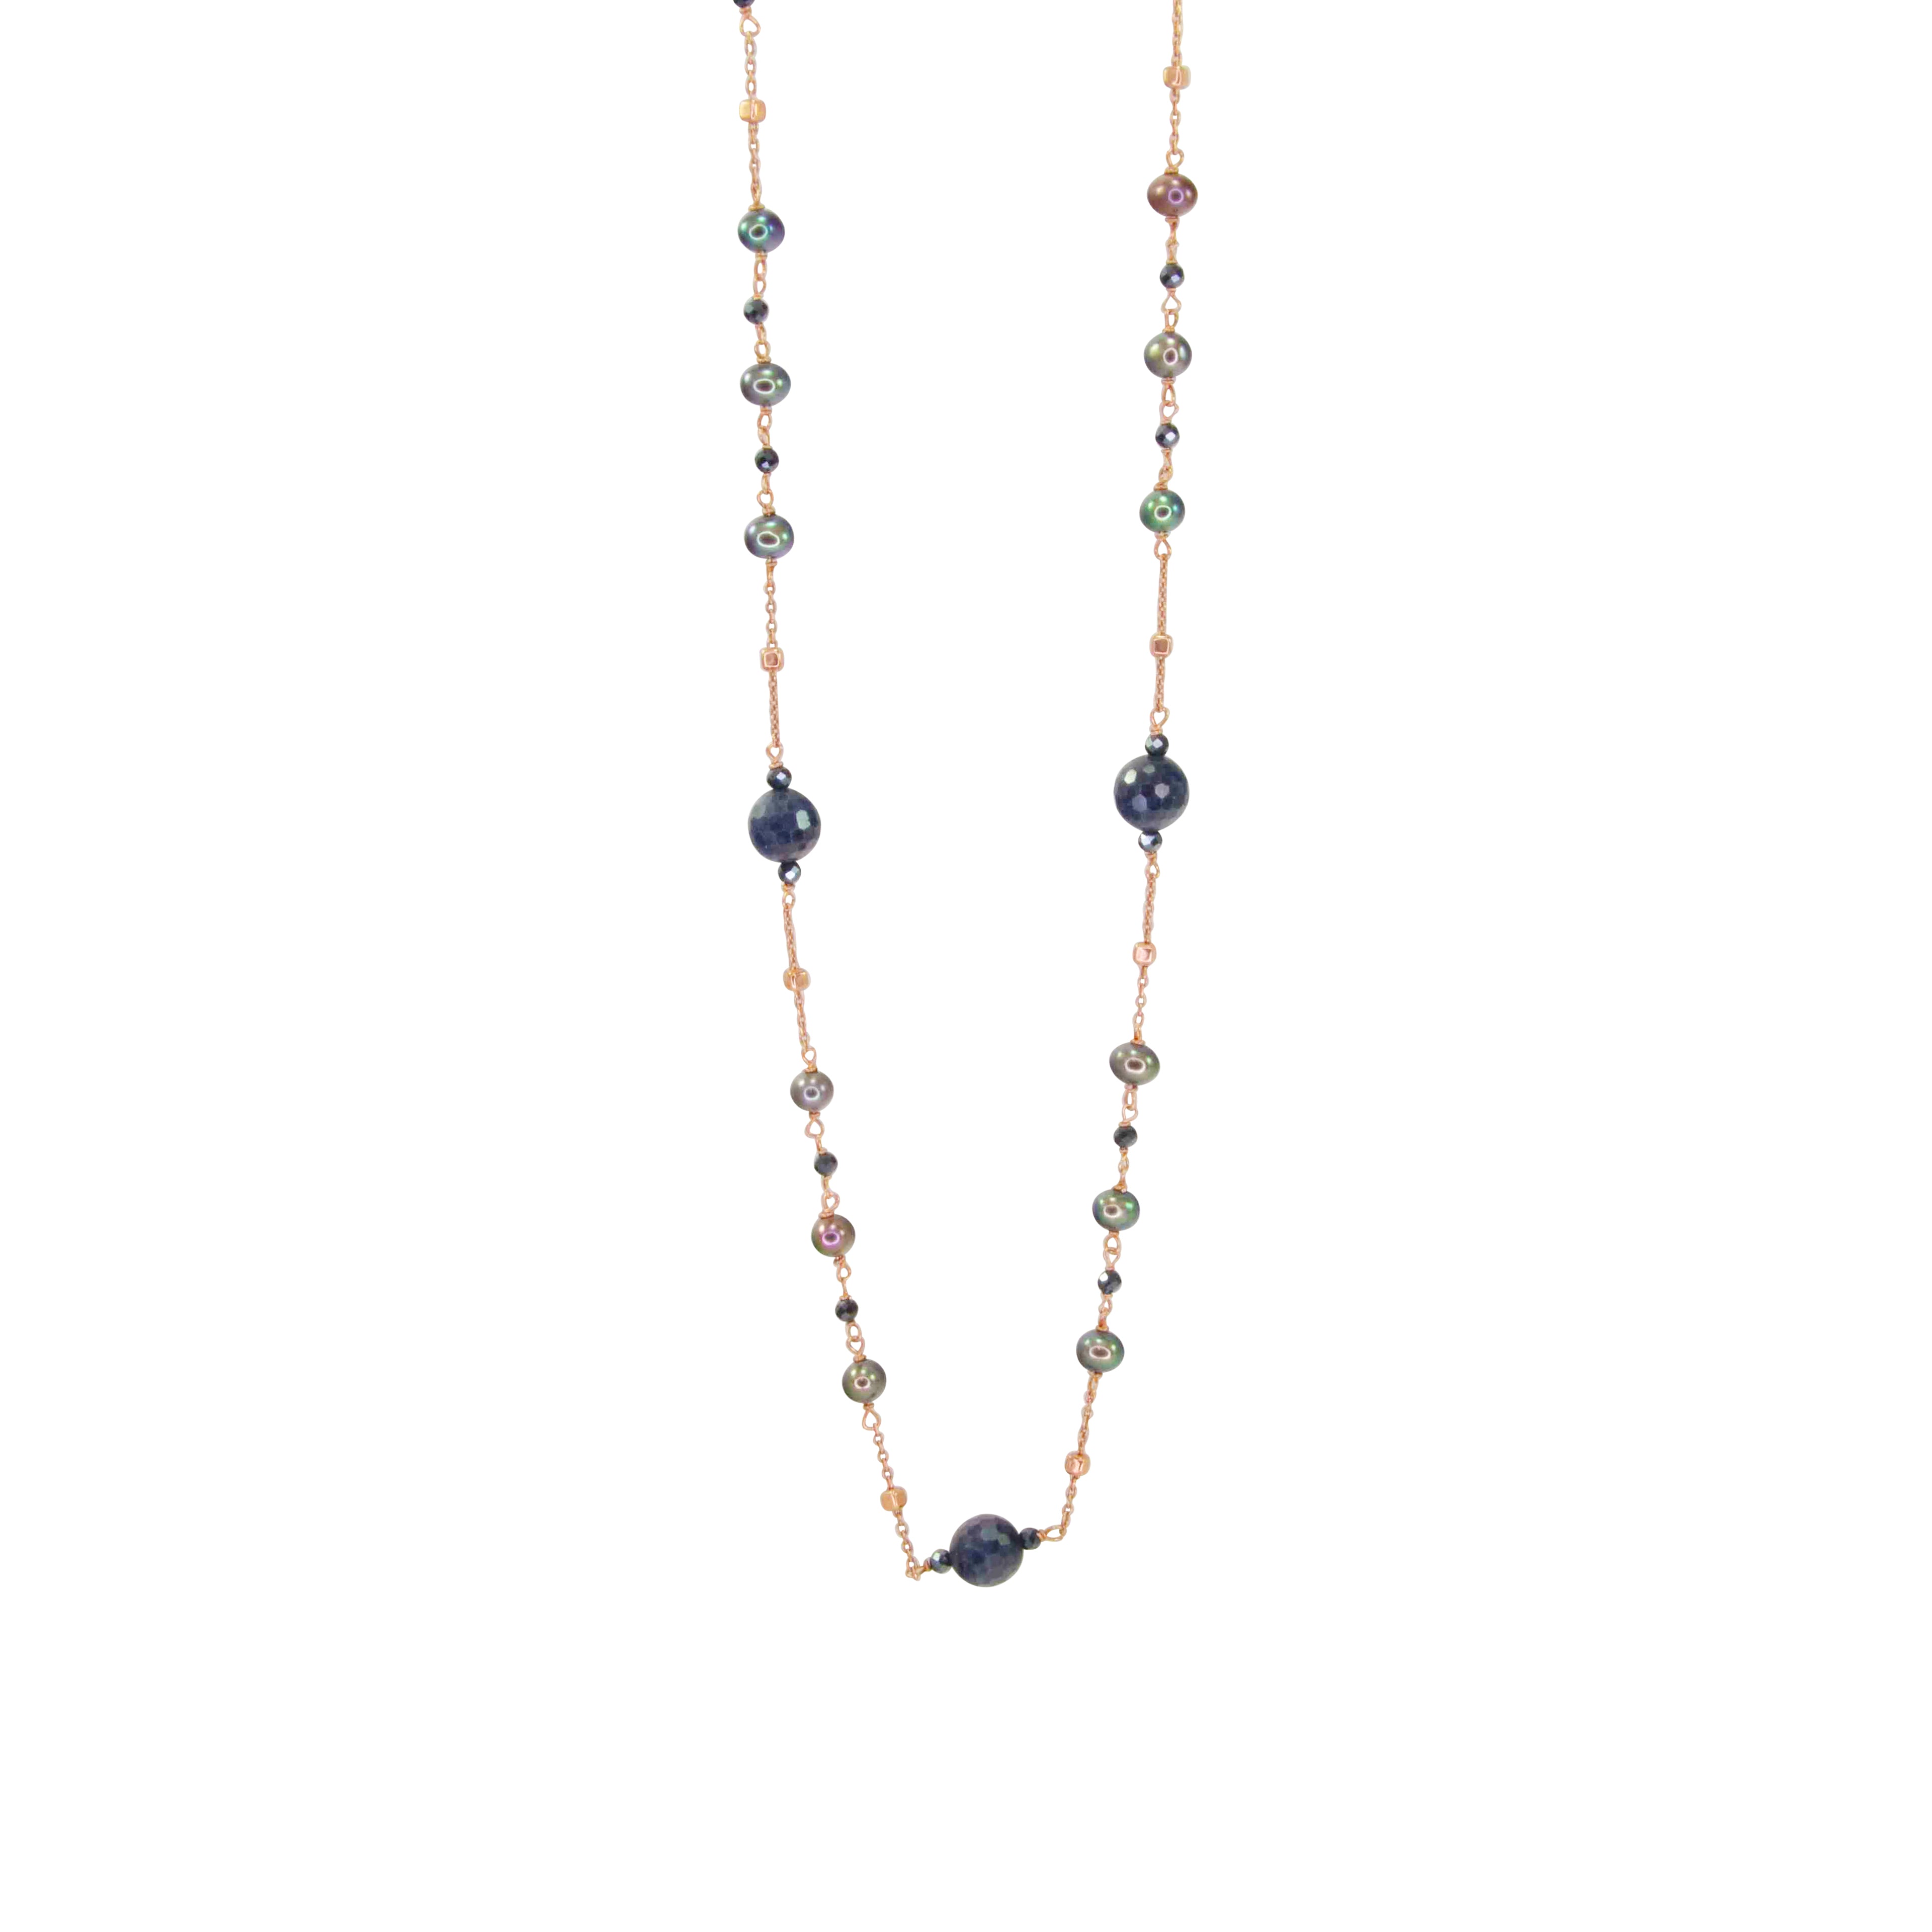 Sapphire, Spinel & Peacock Pearl Necklace